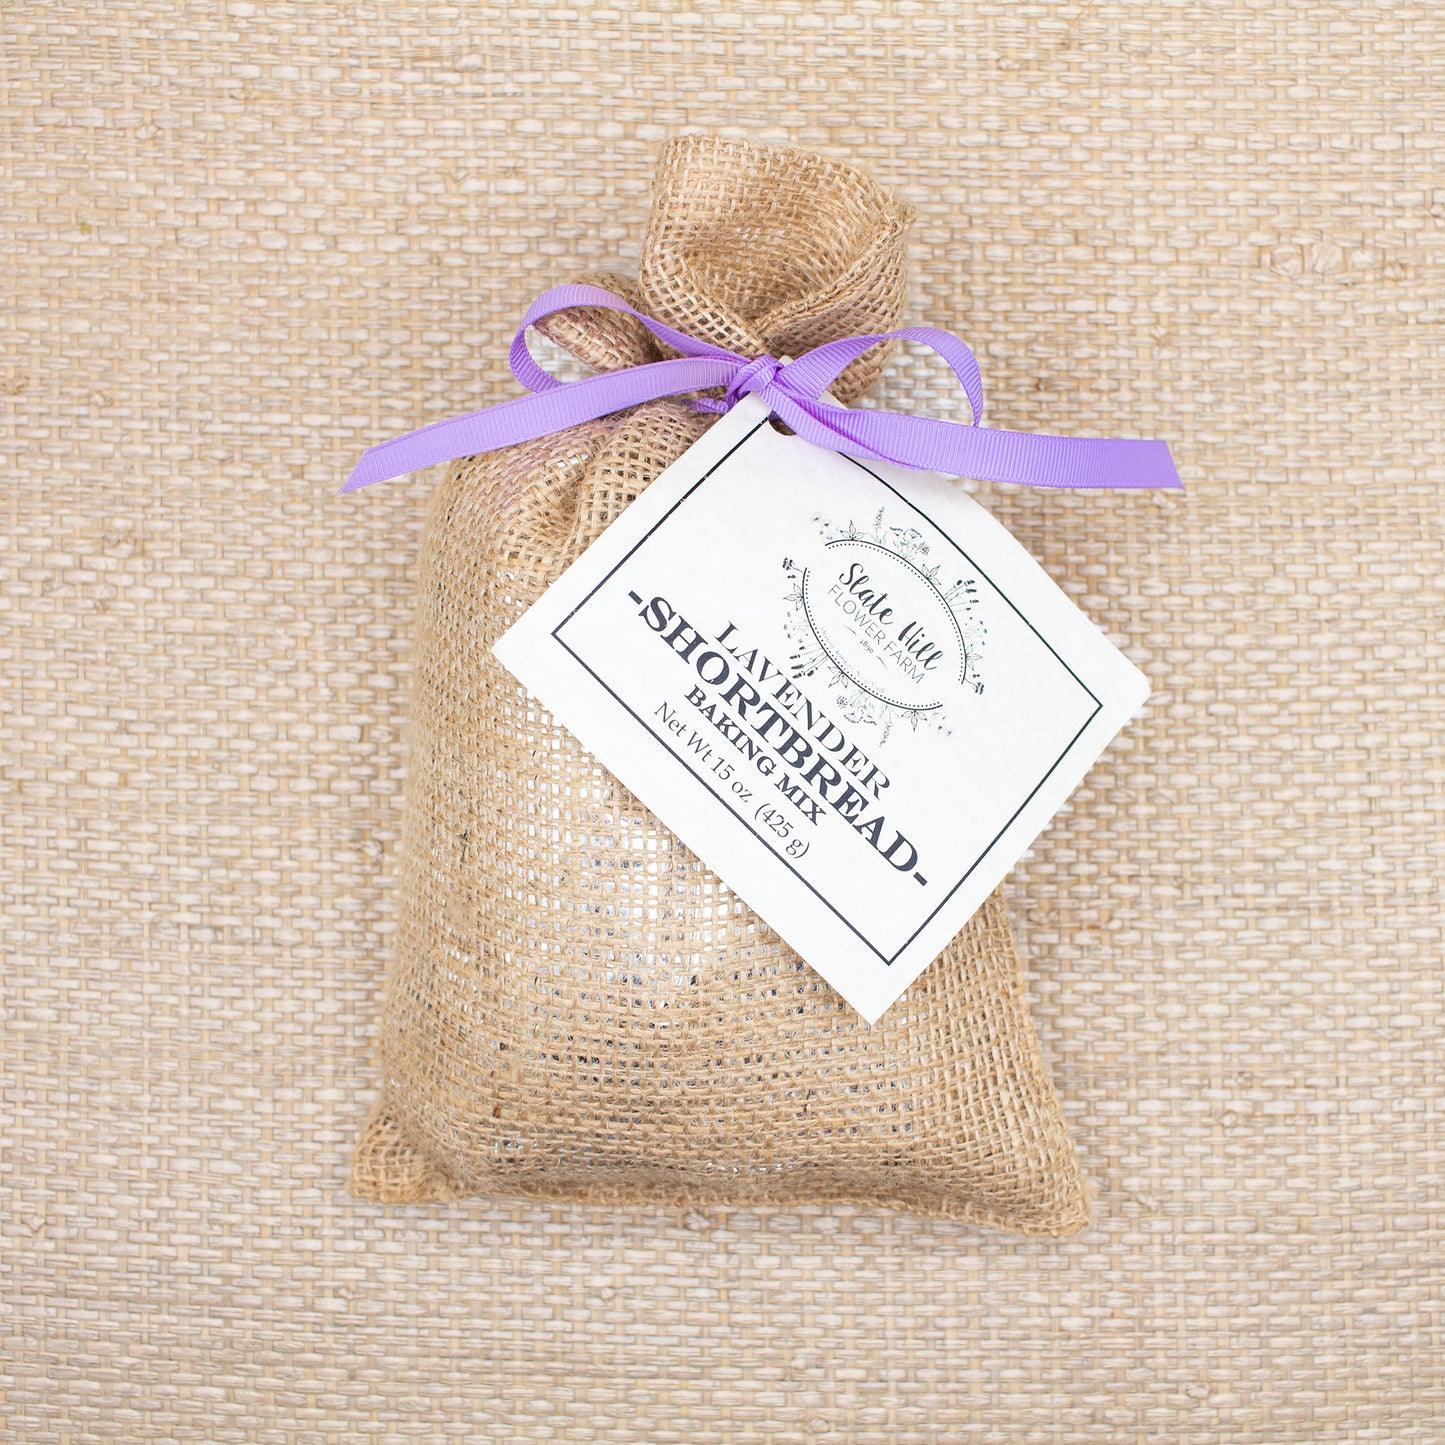 Lavender Shortbread Baking Mix, wrapped in burlap with a light purple ribbon.